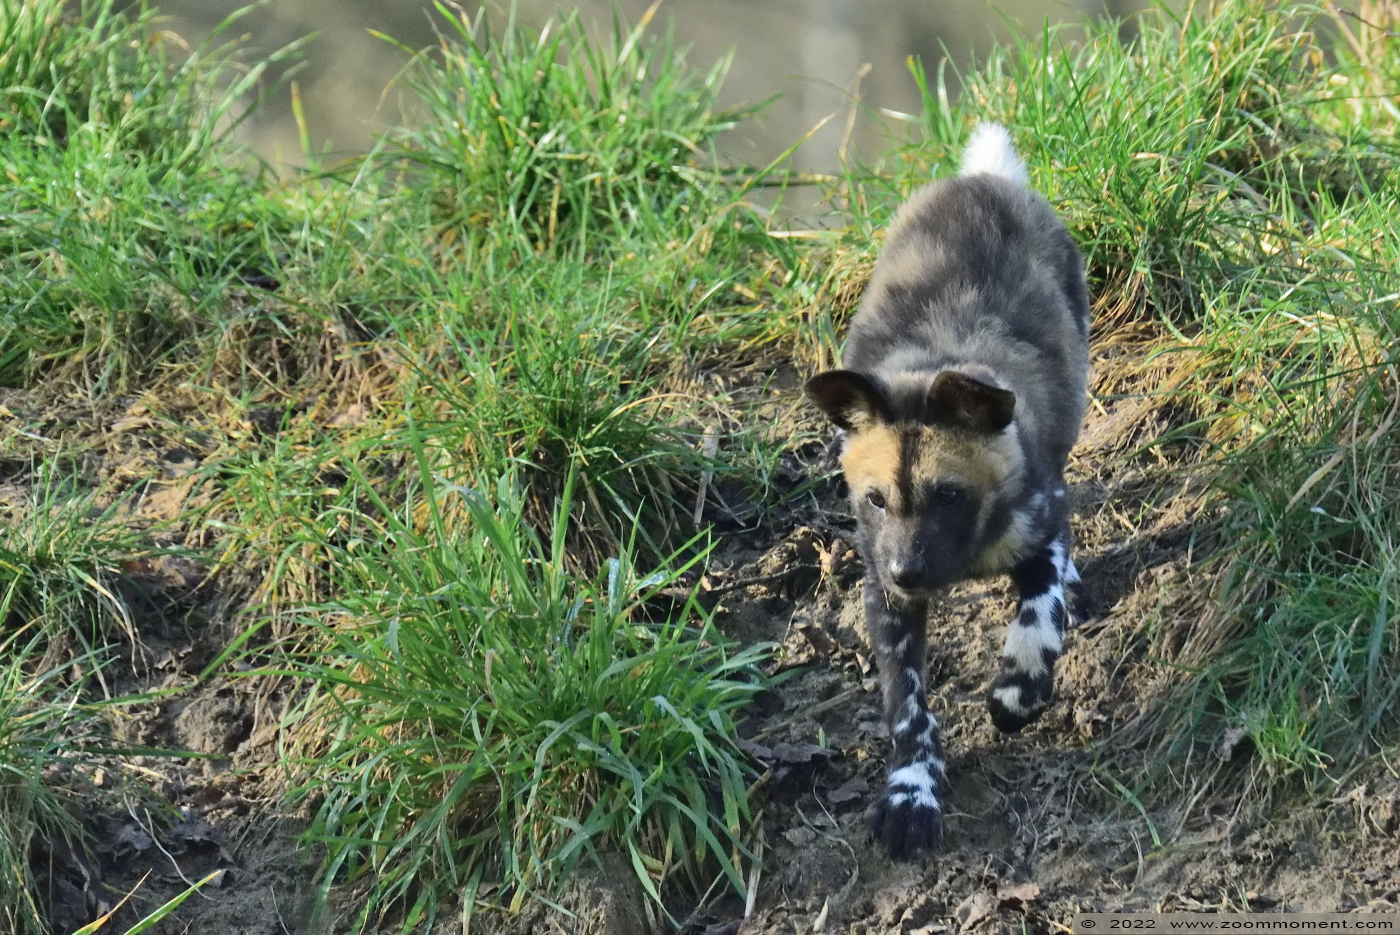 Afrikaanse wilde hond ( Lycaon pictus ) African wild dog
Pups, born 10 Januari 2022, on the picture about 3 weeks old

Keywords: Safaripark Beekse Bergen Afrikaanse wilde hond Lycaon pictus African wild dog pup